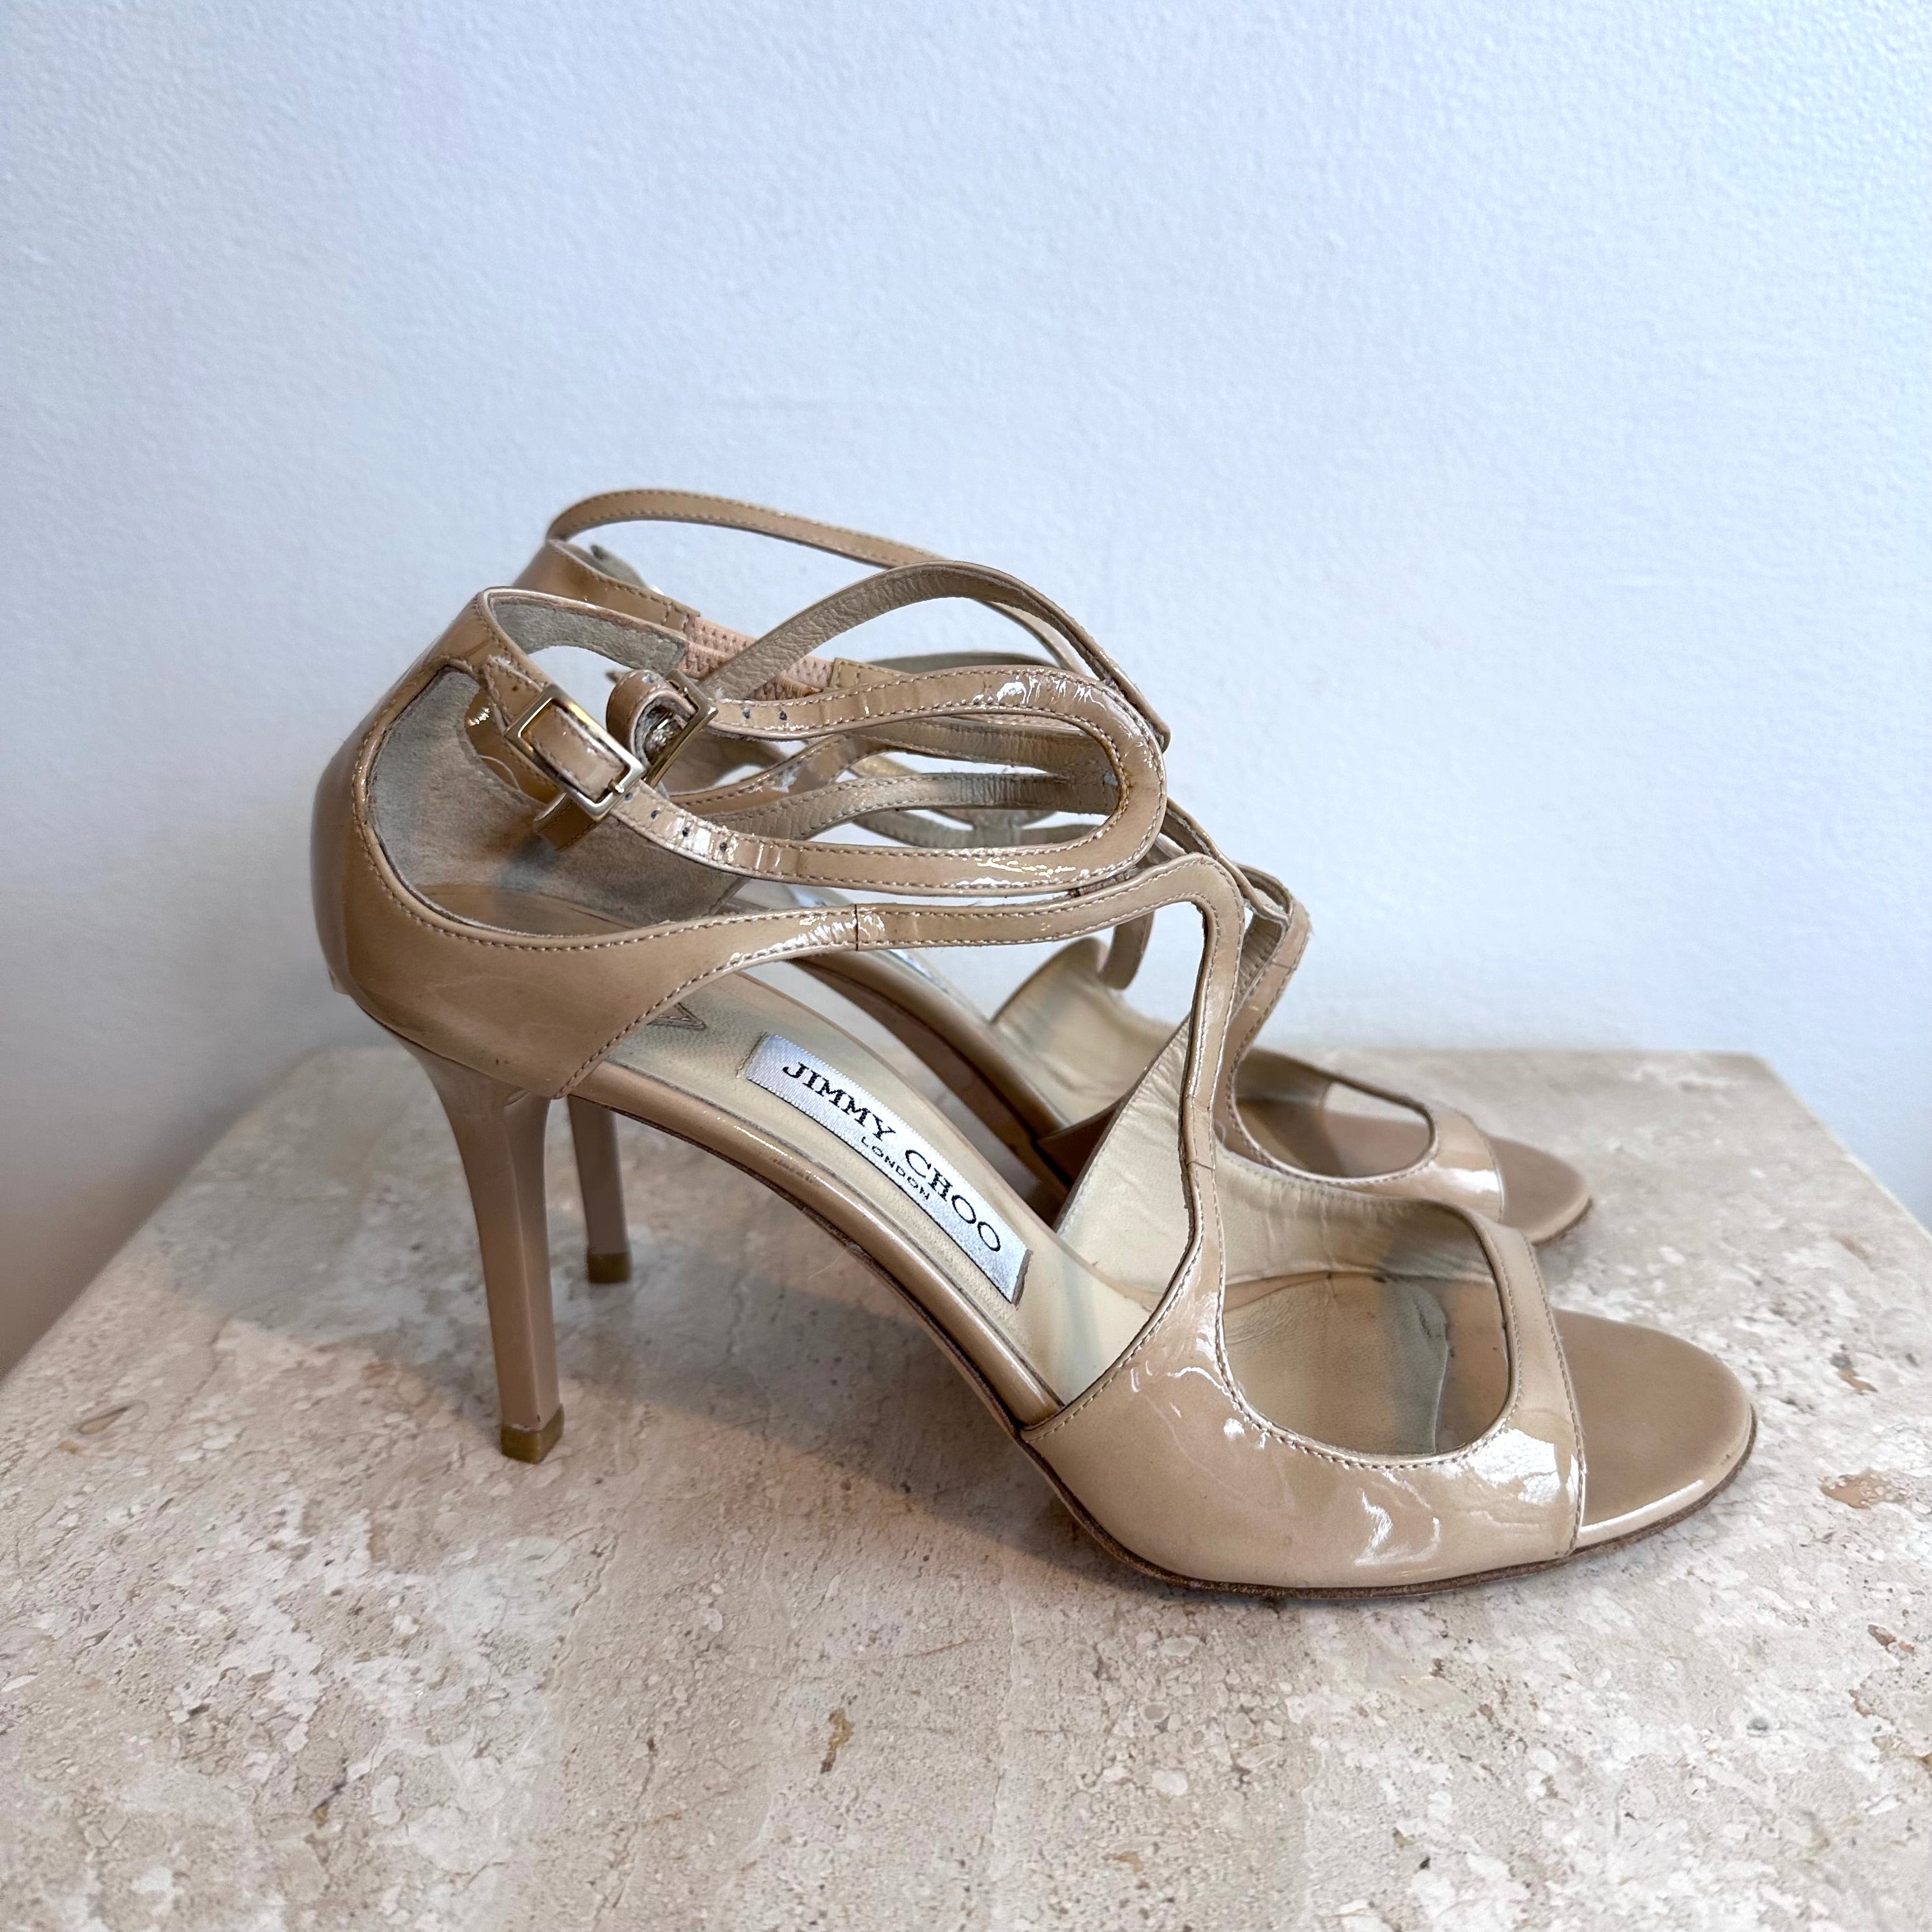 Pre-Owned JIMMY CHOO Ivettee Patent Leather Sandal Size 39